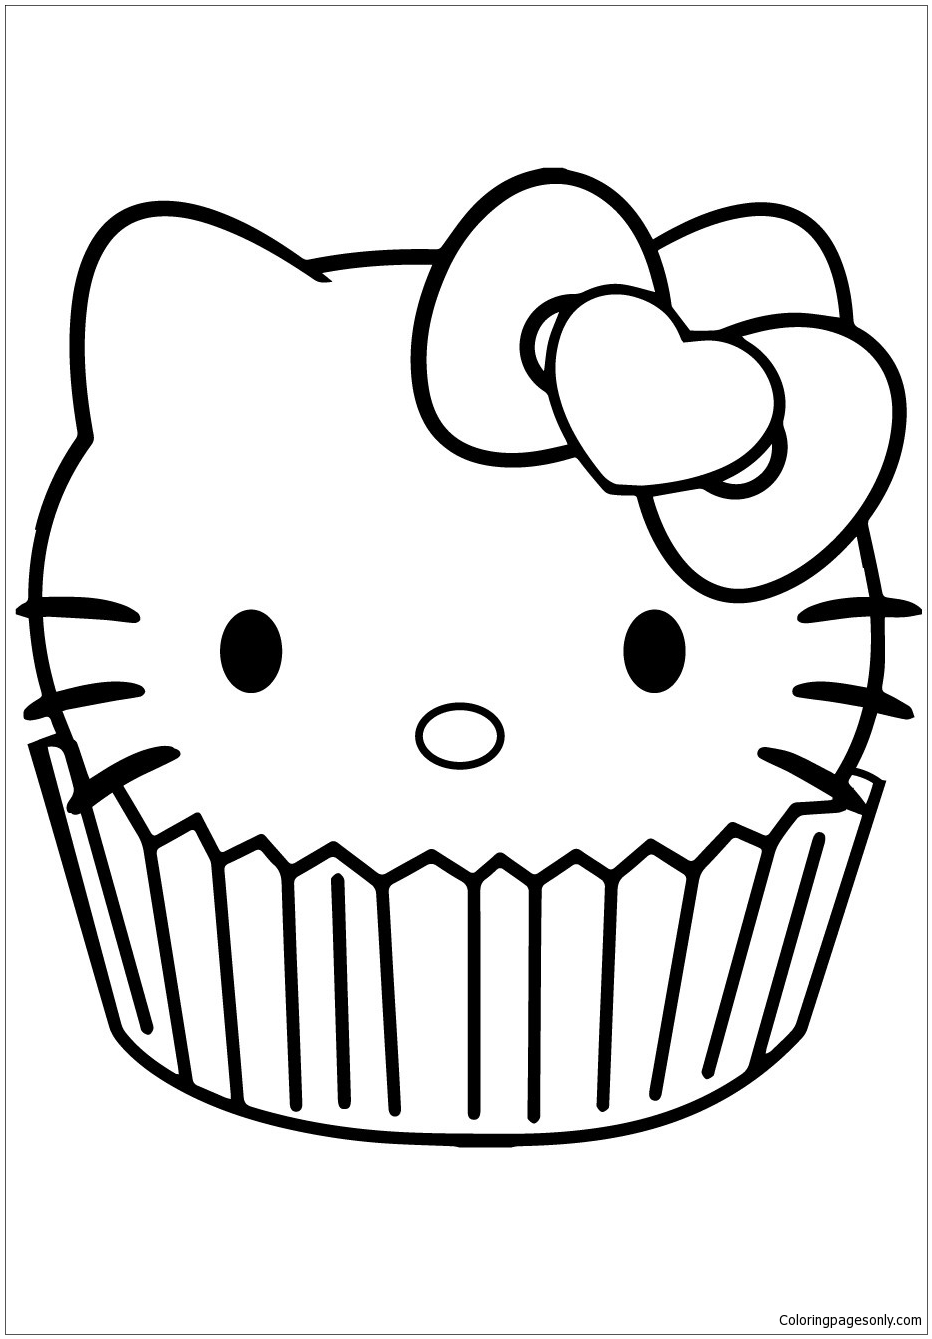 Hello Kitty Cupcake Coloring Page